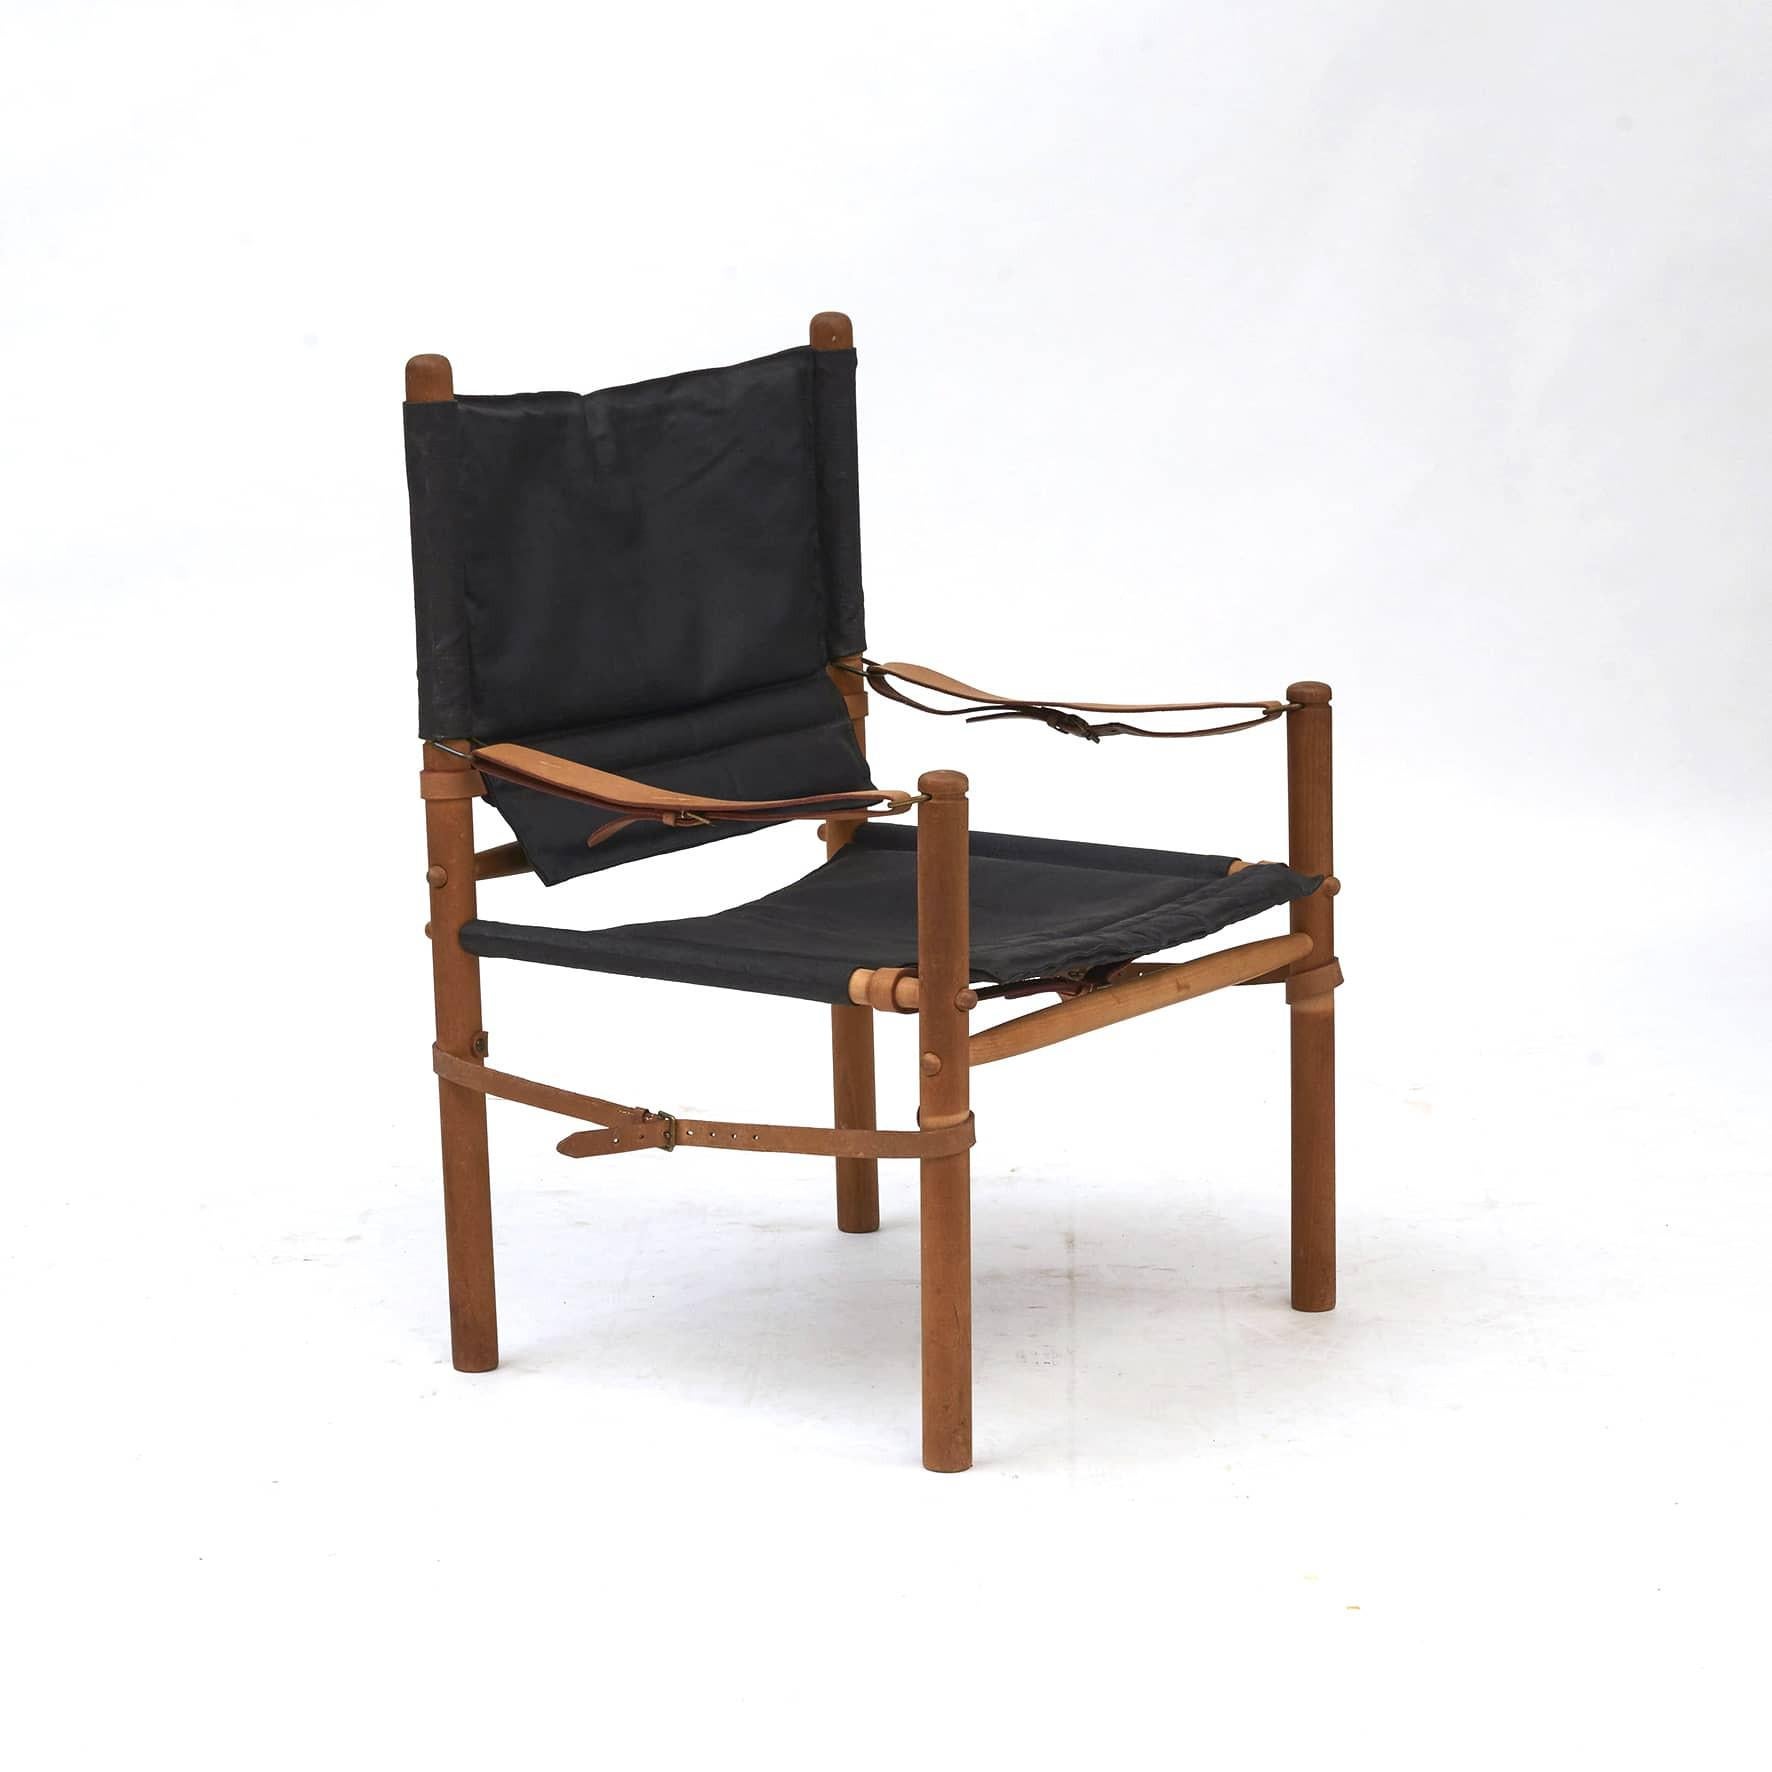 Pair of Oasis Safari chairs designed by Axel Thygesen for Interna, circa 1965.
Designed and manufactured in the 1960s.
Beech frame with a black canvas seating.

Untouched in good original condition.
Sold as a pair.